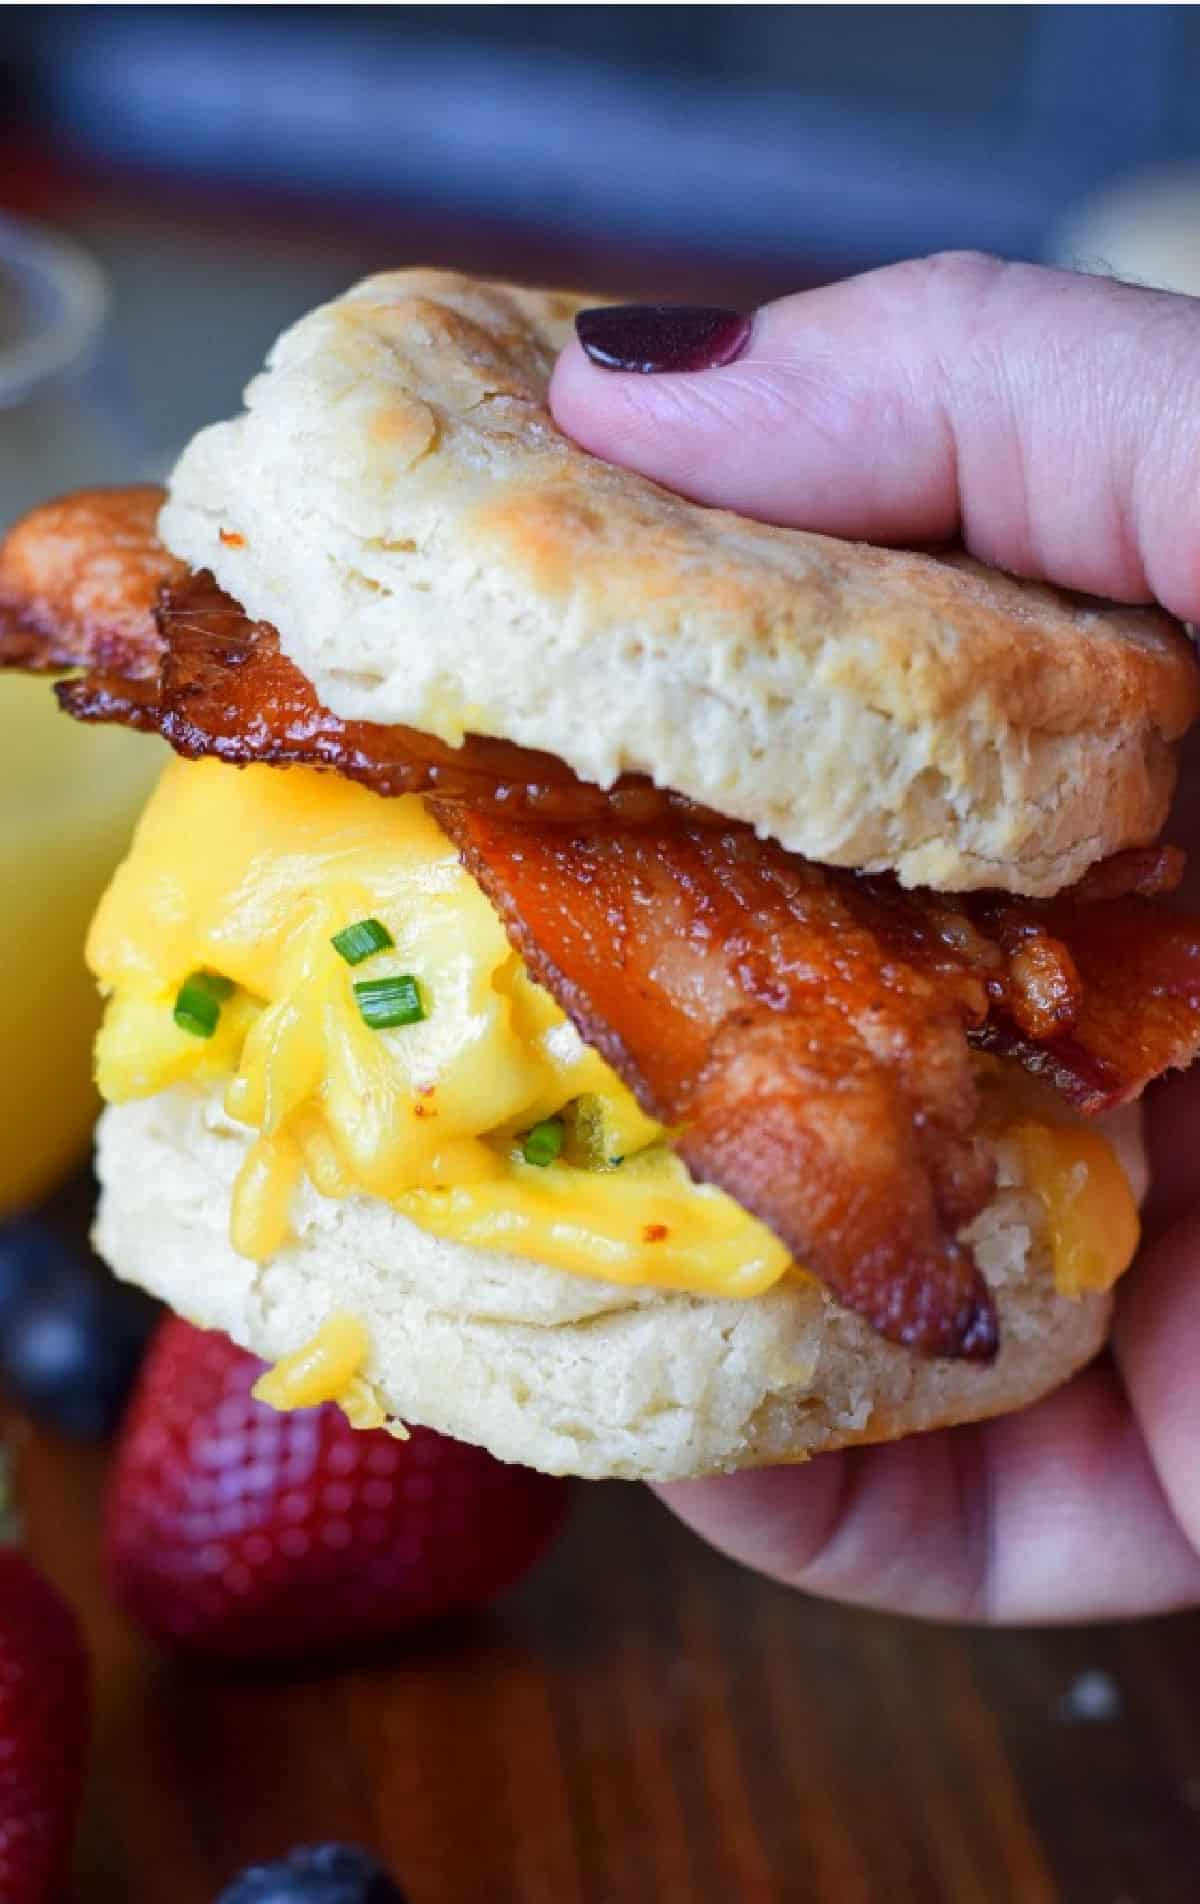 Bacon egg and cheese biscuit being held in a hand.